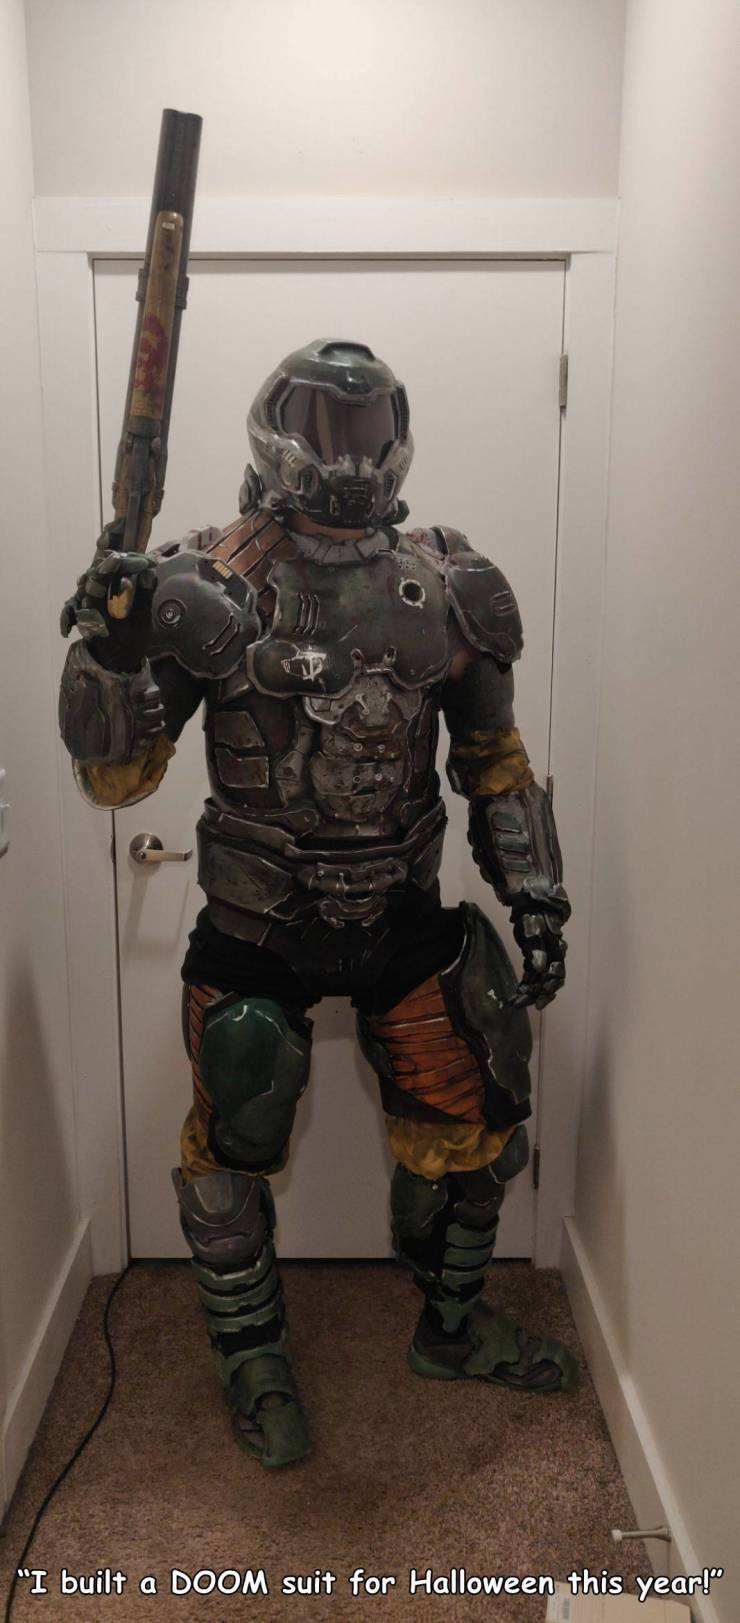 soldier - "I built a Doom suit for Halloween this year!"